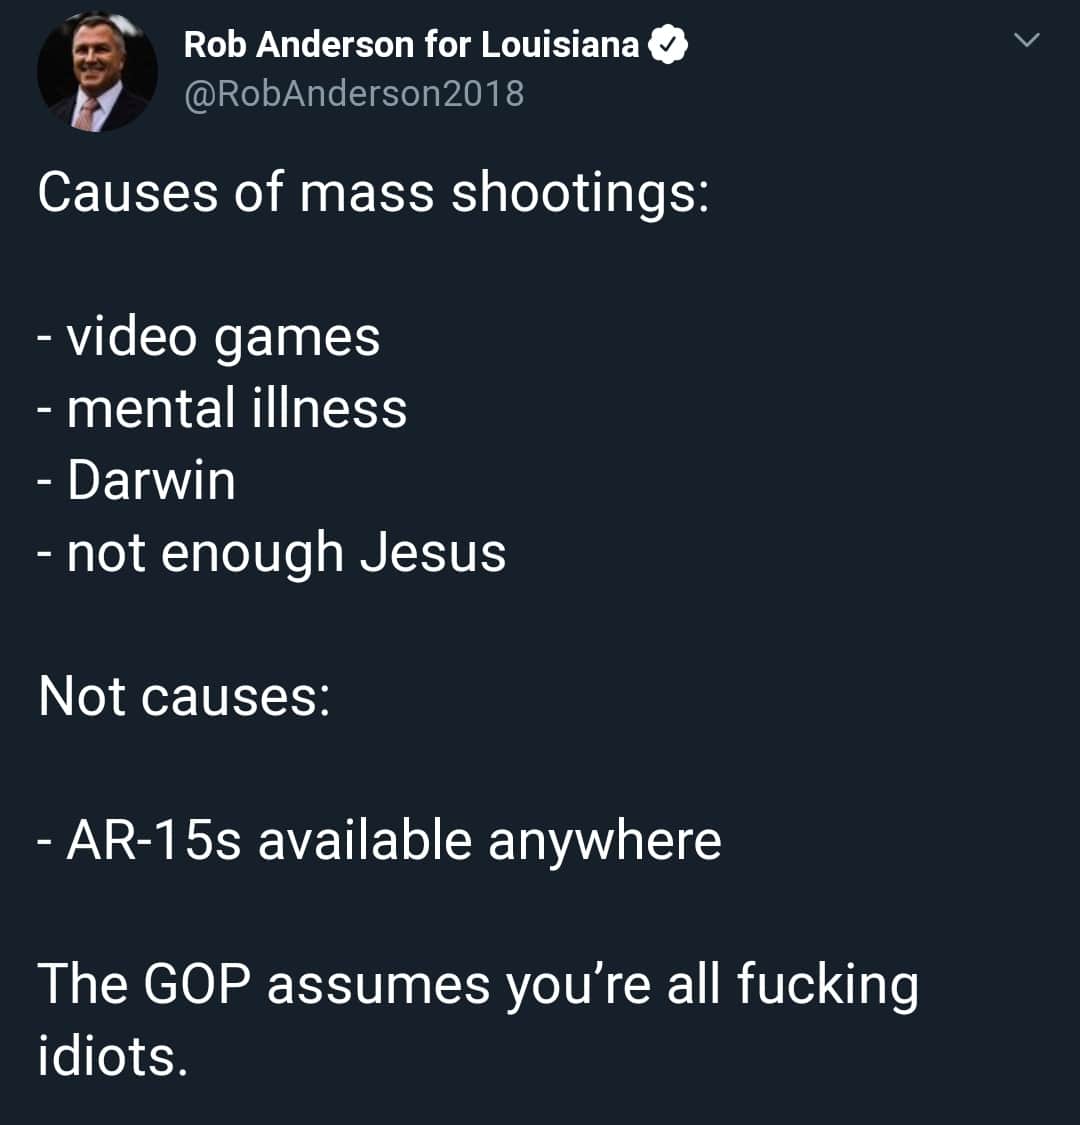 political political-memes political text: Rob Anderson for Louisiana @RobAnderson2018 Causes of mass shootings: - video games - mental illness - Darwin - not enough Jesus Not causes: - AR-1 5s available anywhere The GOP assumes you're all fucking idiots. 